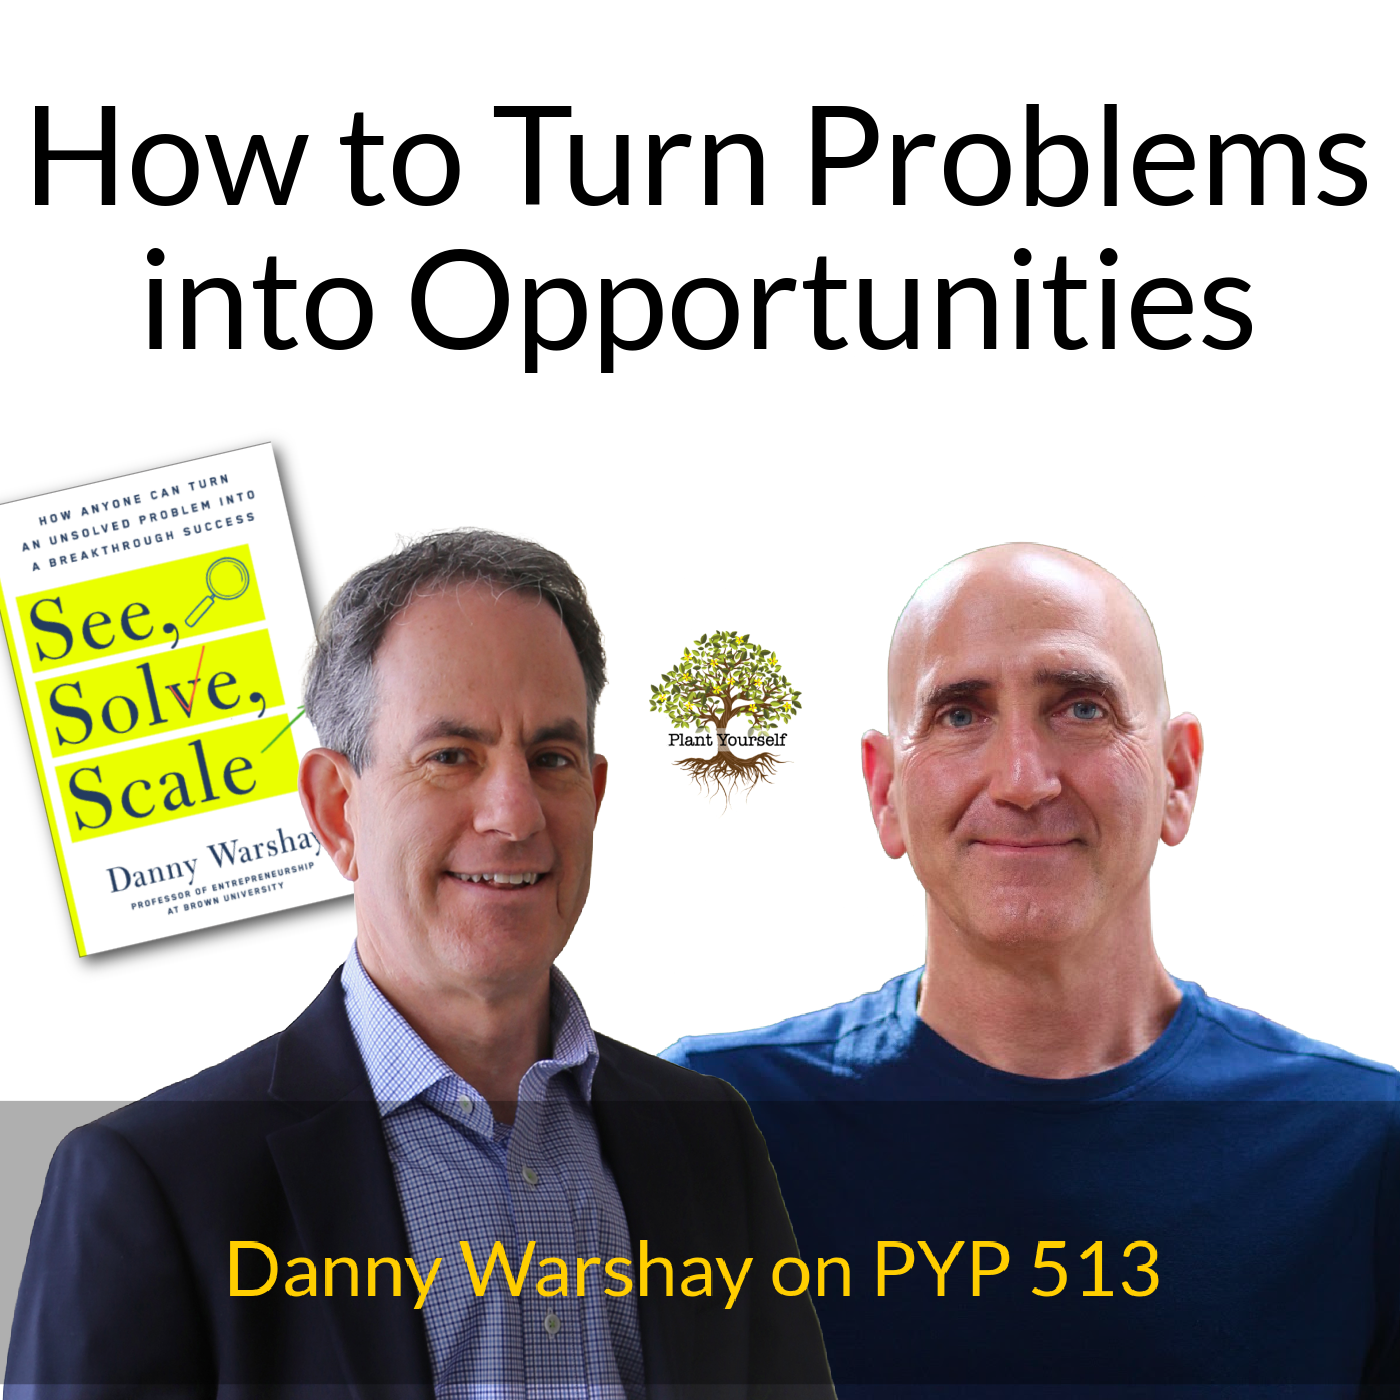 The Pissed-Off Entrepreneur: How to Turn Problems into Opportunities: Danny Warshay on PYP 513